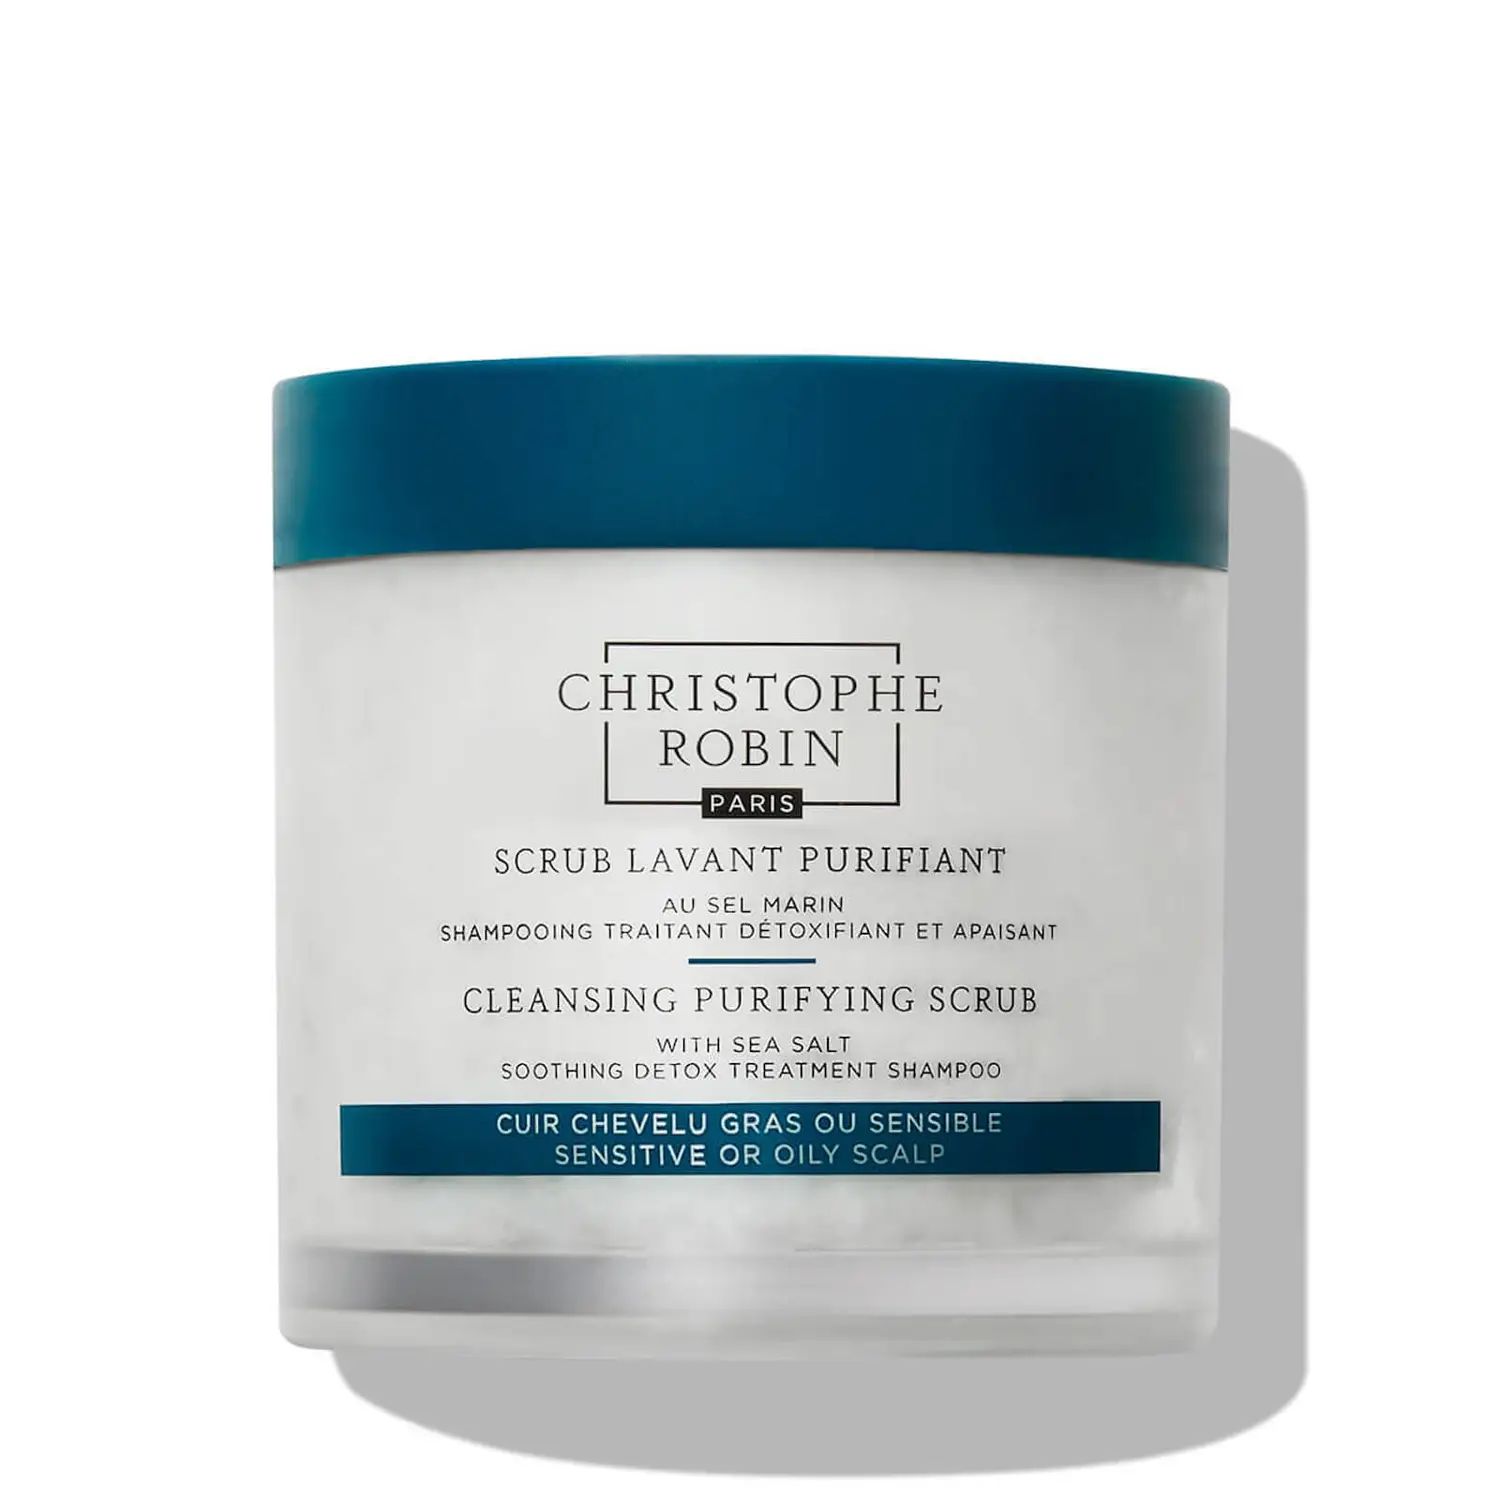 Christophe Robin Cleansing Purifying Scrub with Sea Salt 250ml | Skincare RX